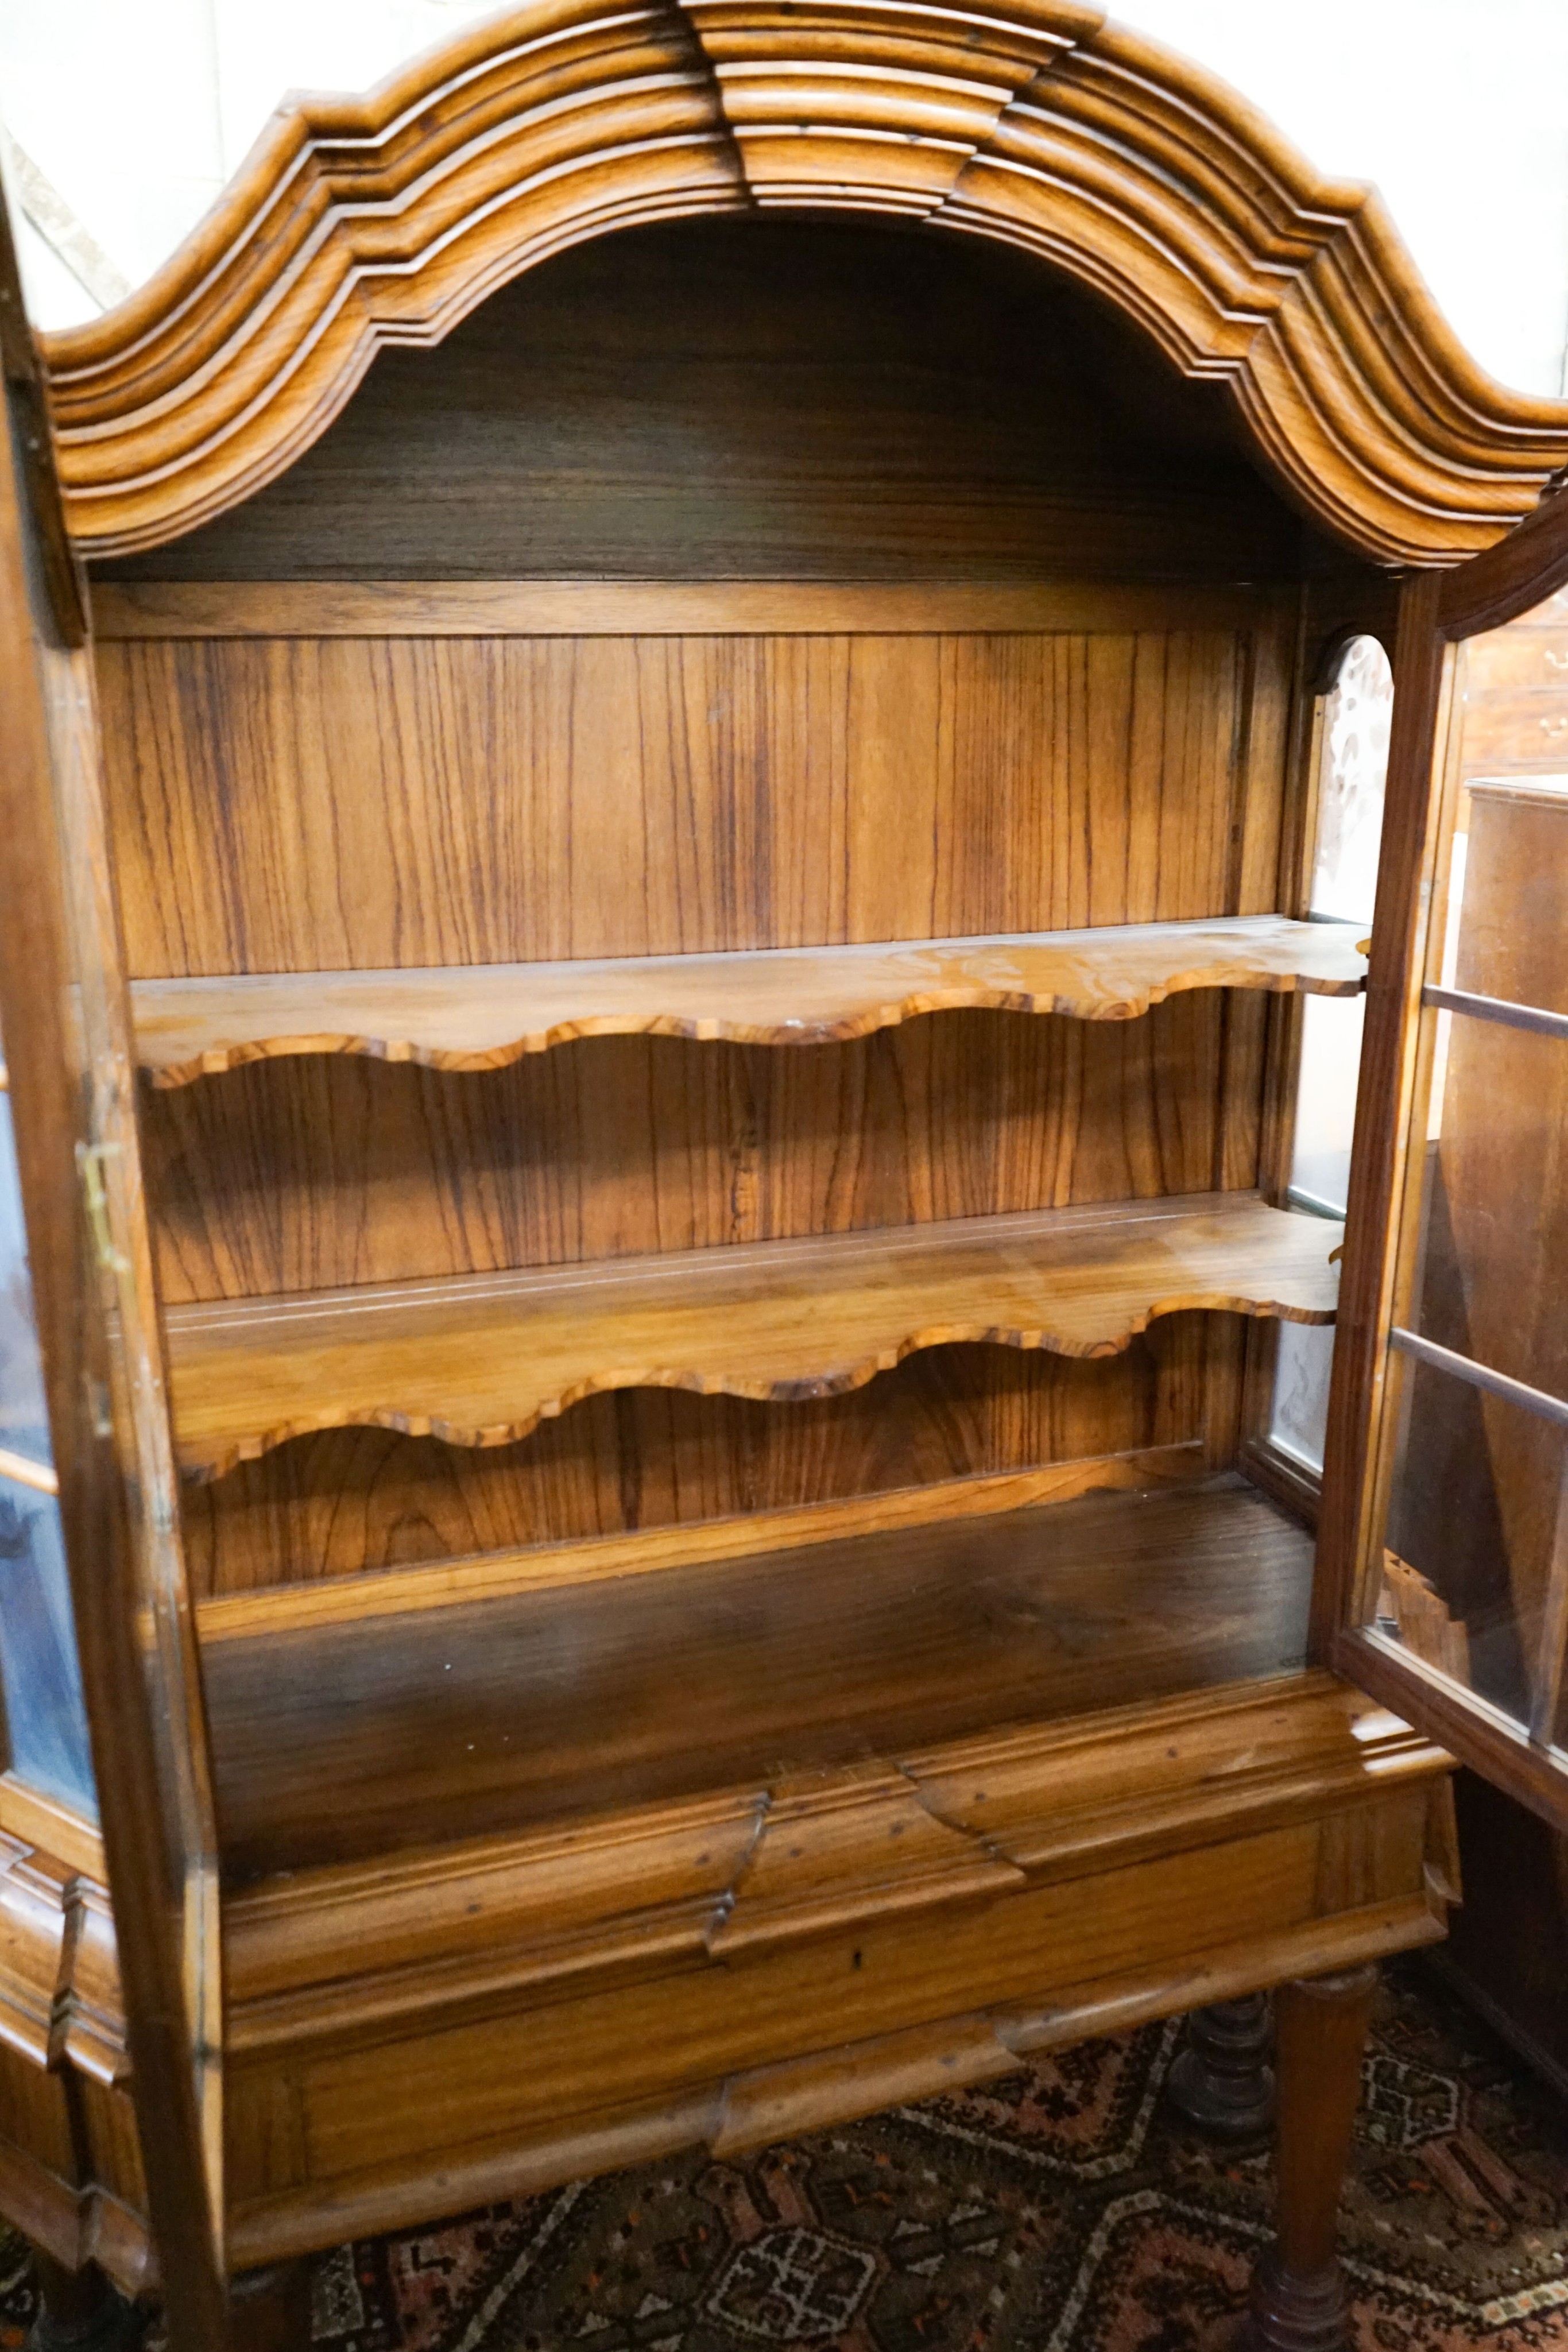 An 18th century style Dutch walnut display case, with double-arched moulded cornice over a pair of - Image 3 of 3